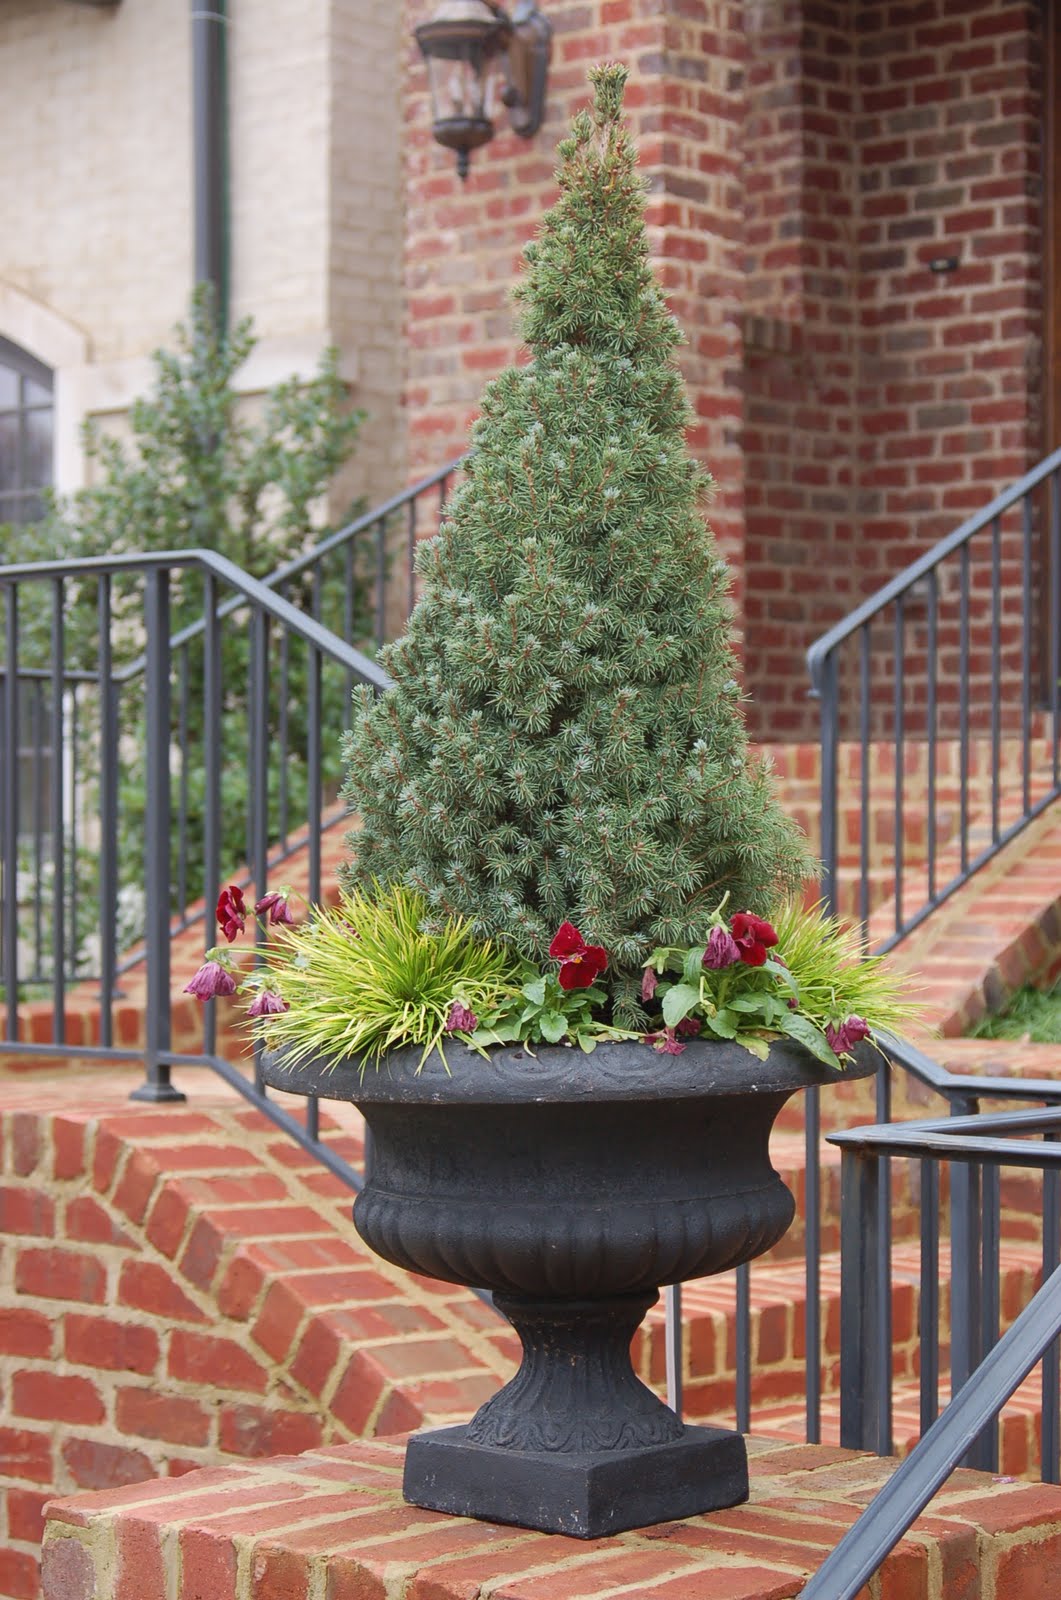 bwisegardening: Day 58 - Christmas Tree Containers